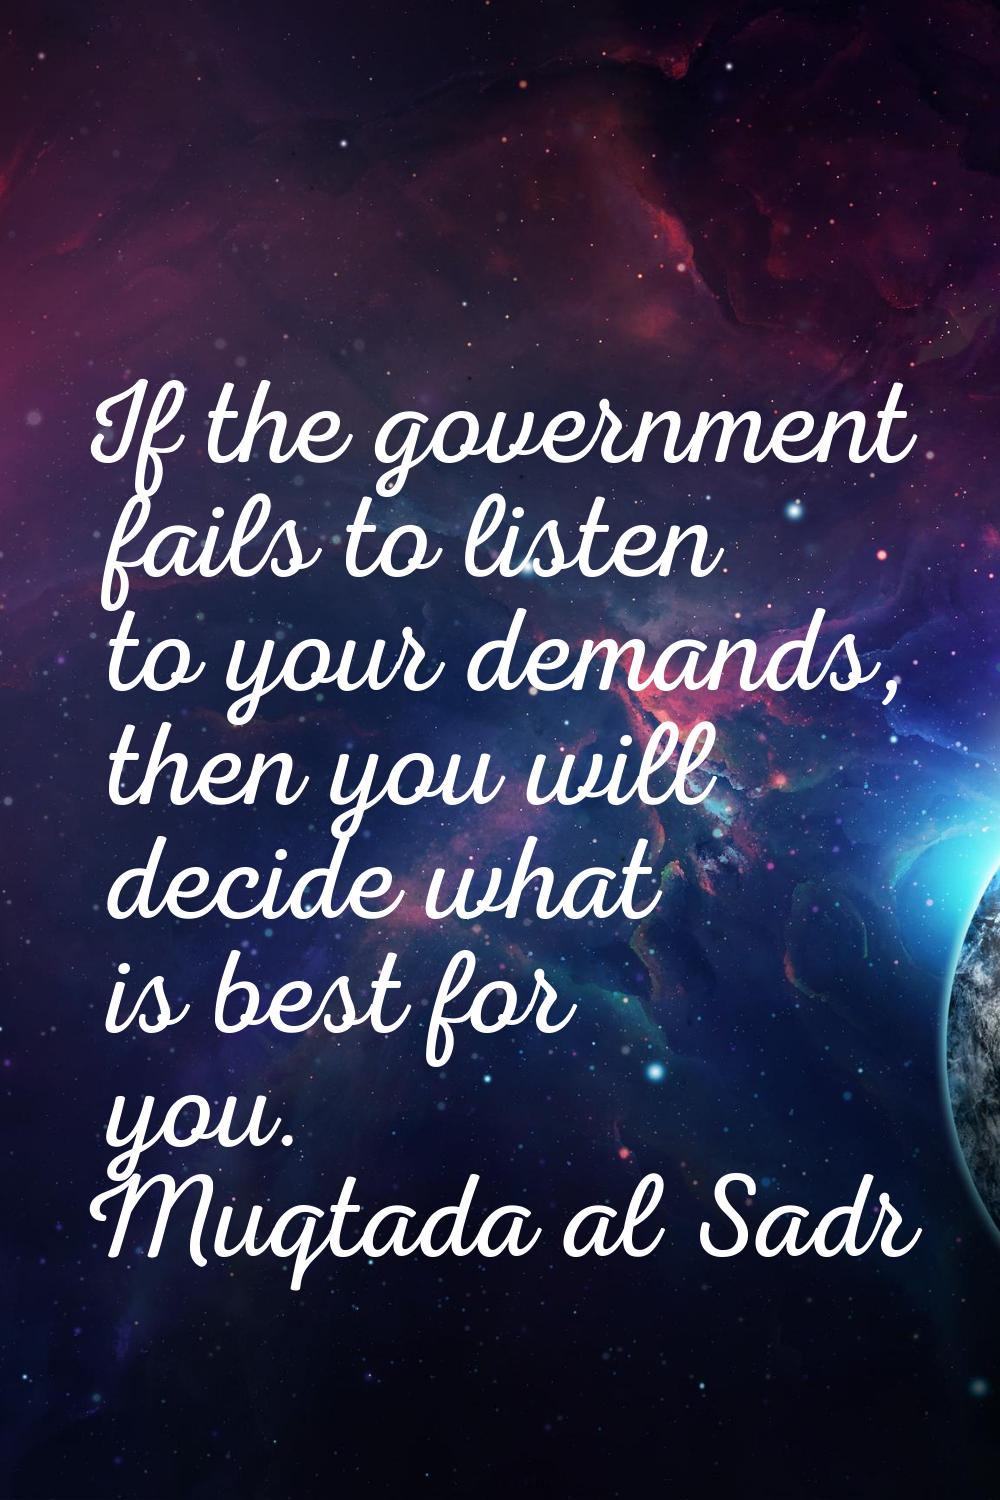 If the government fails to listen to your demands, then you will decide what is best for you.